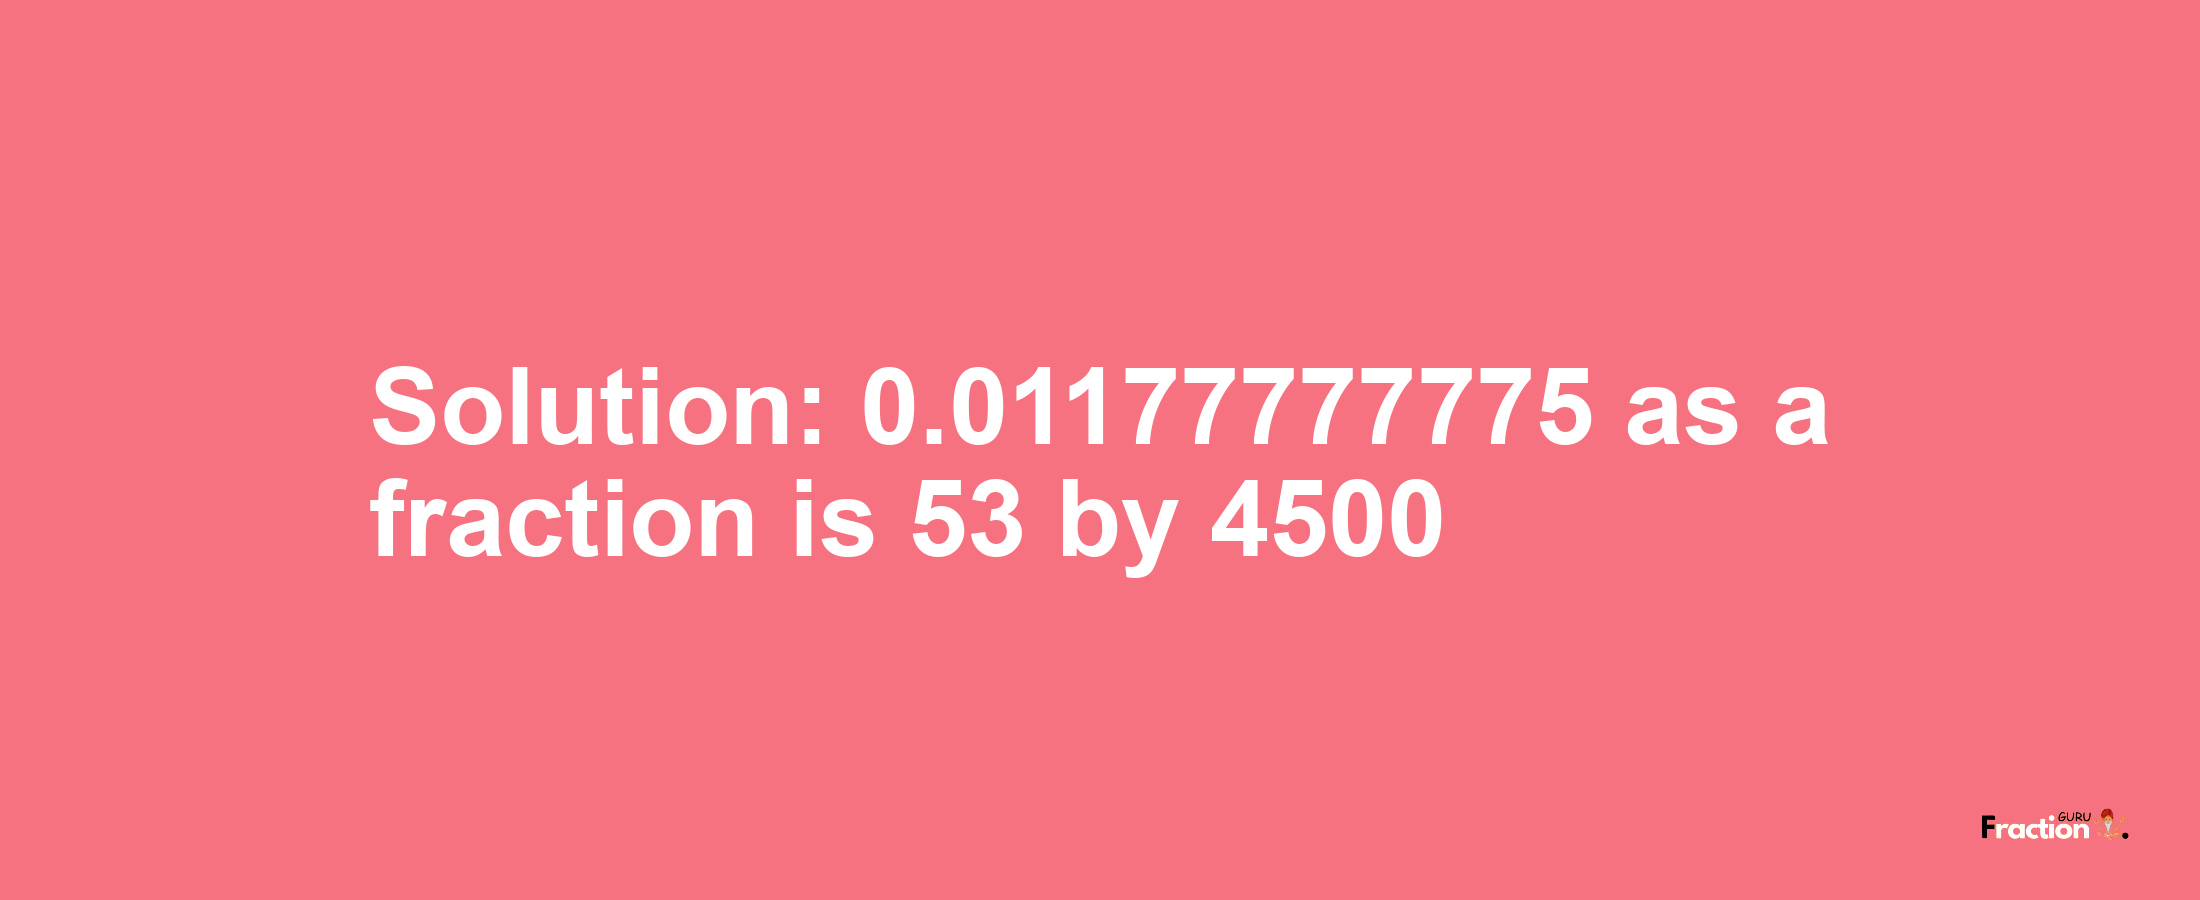 Solution:0.01177777775 as a fraction is 53/4500